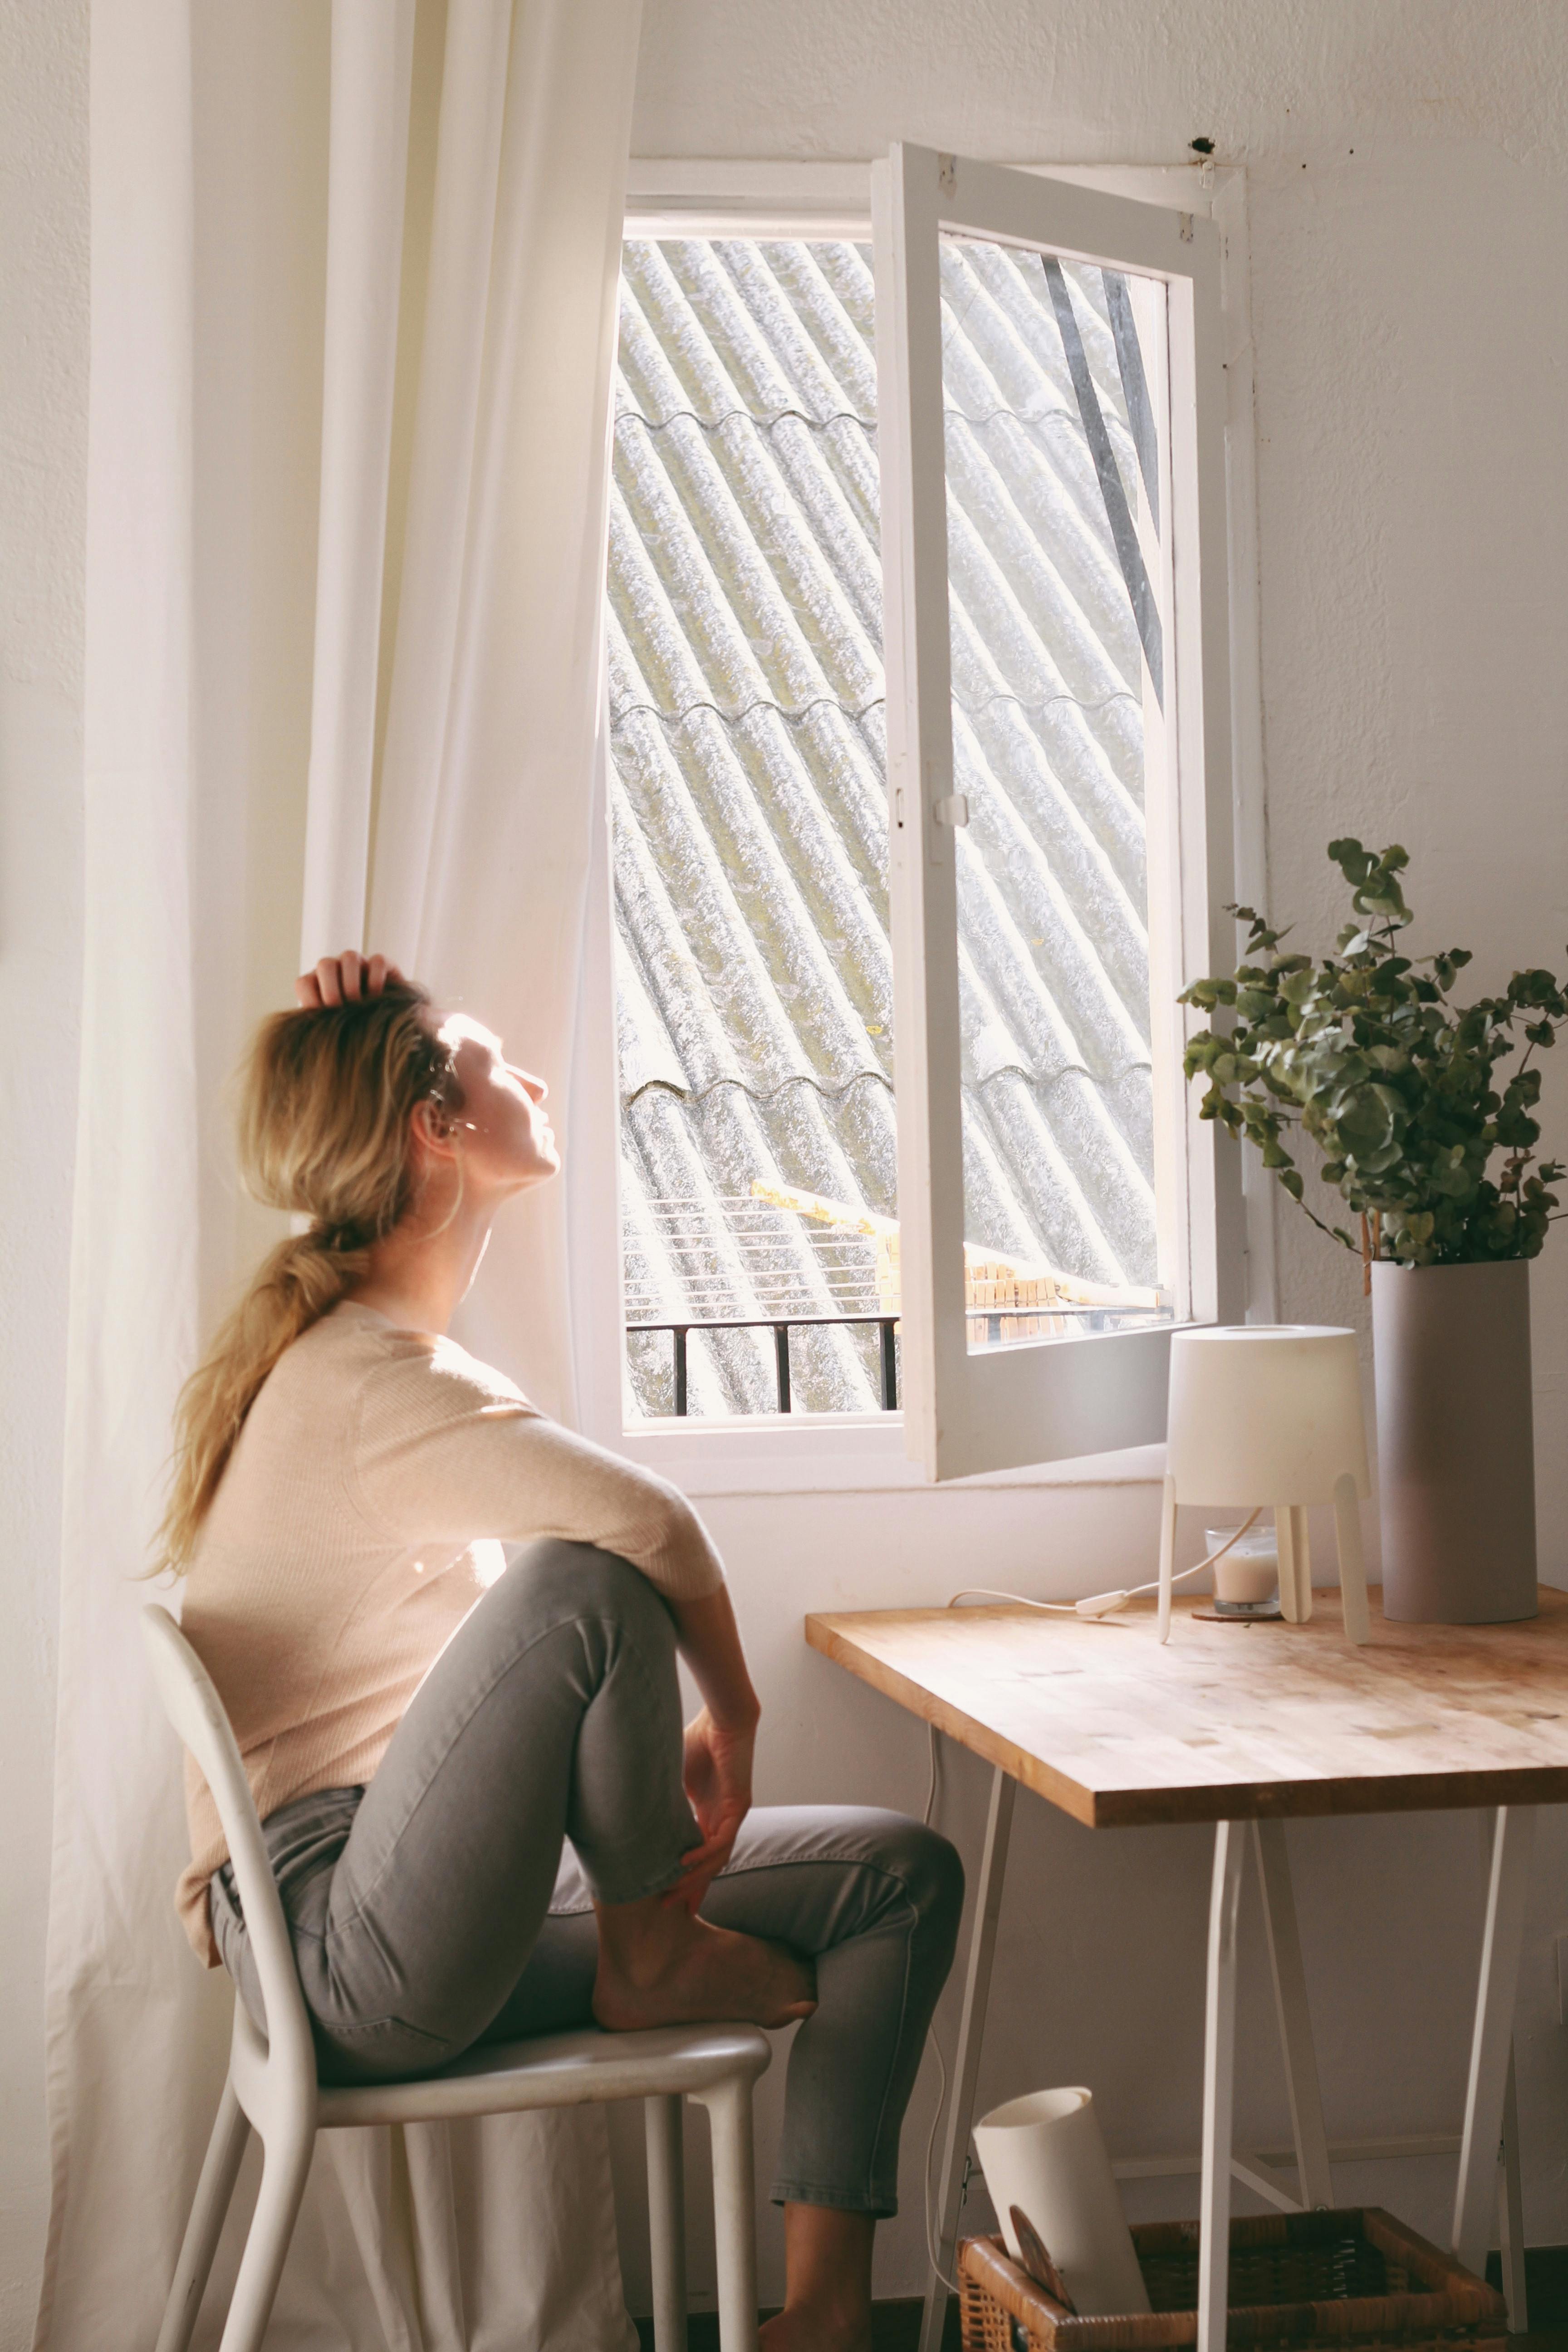 A young woman looking out of her apartment window | Source: Pexels